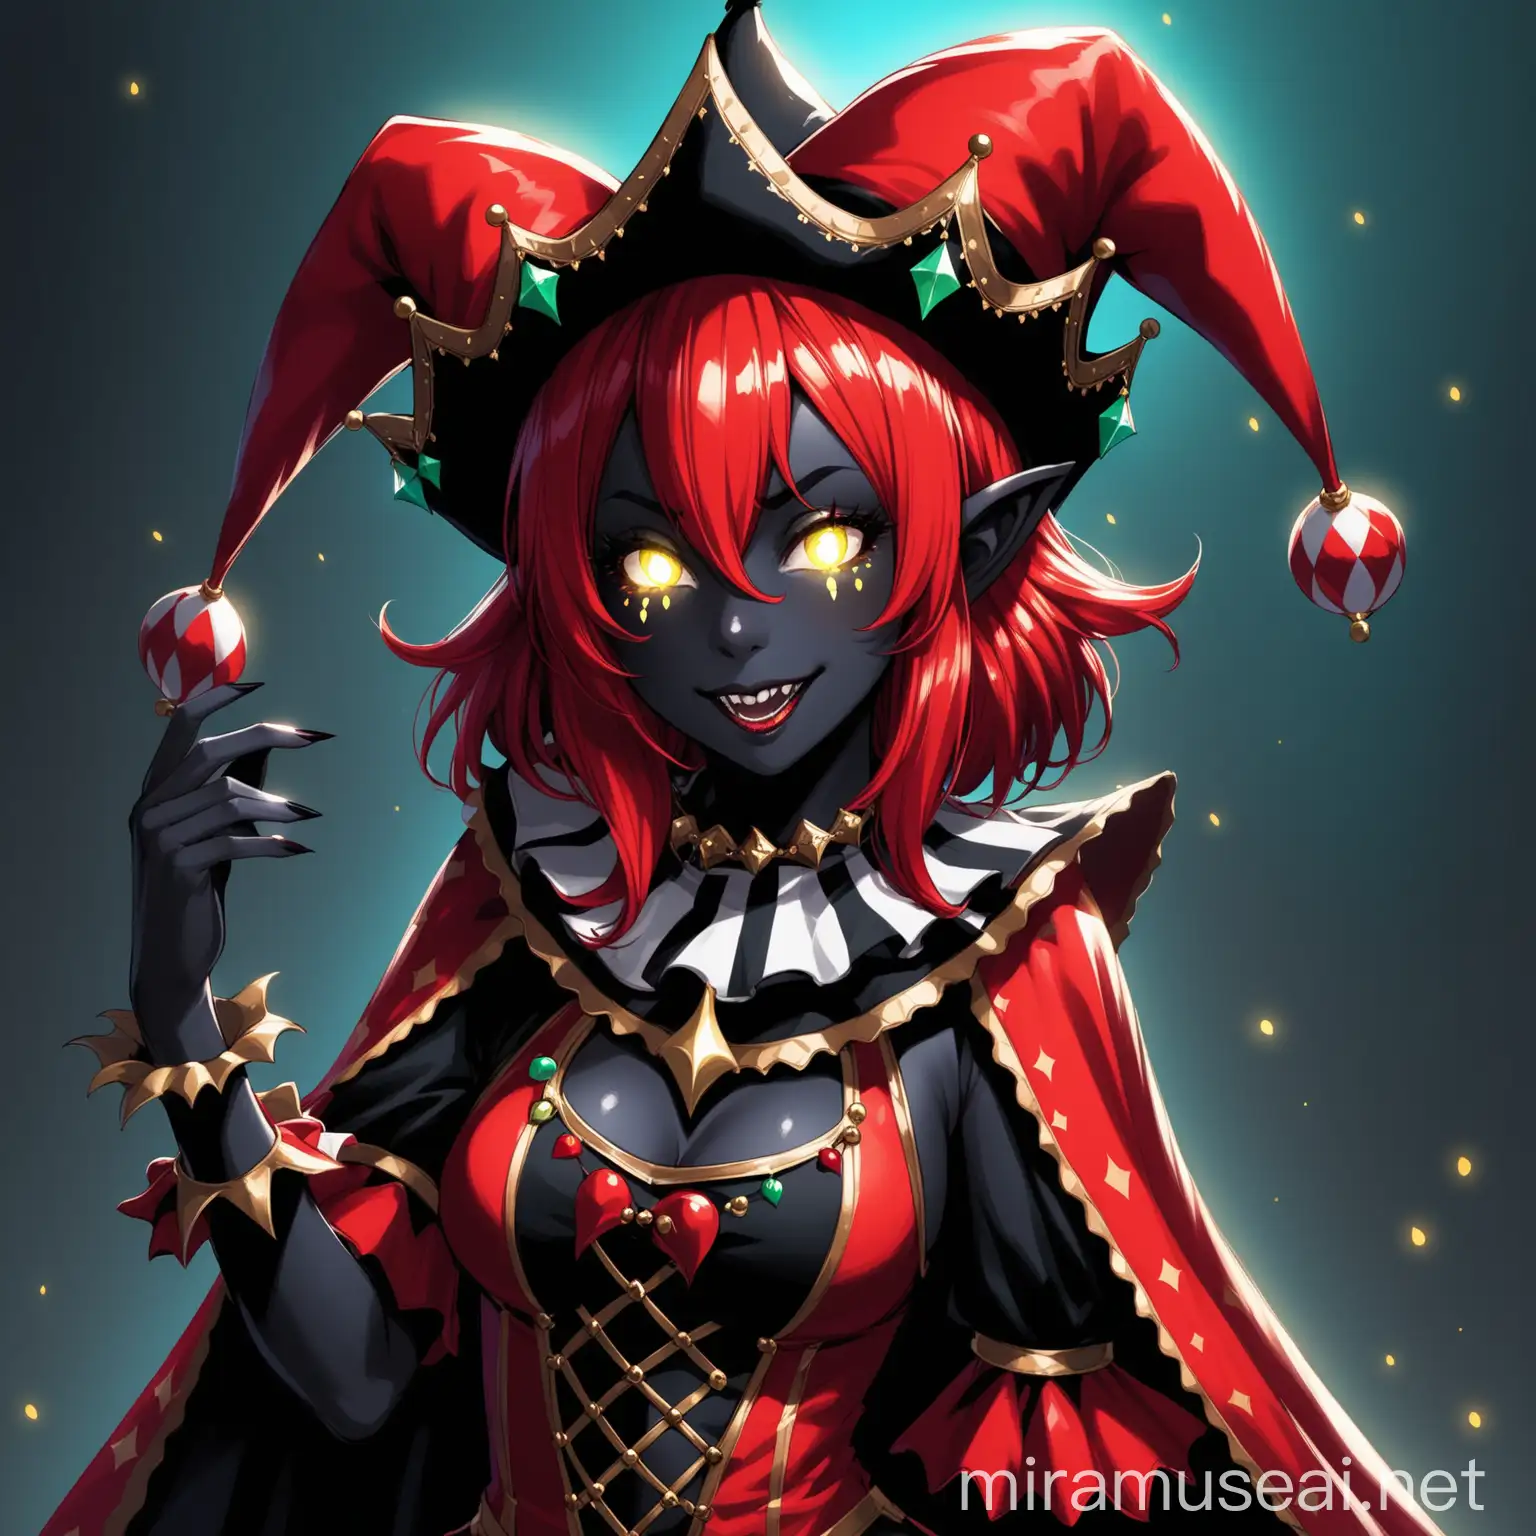 Luminous Chaos Enigmatic Female Fantasy Jester with Red Hair